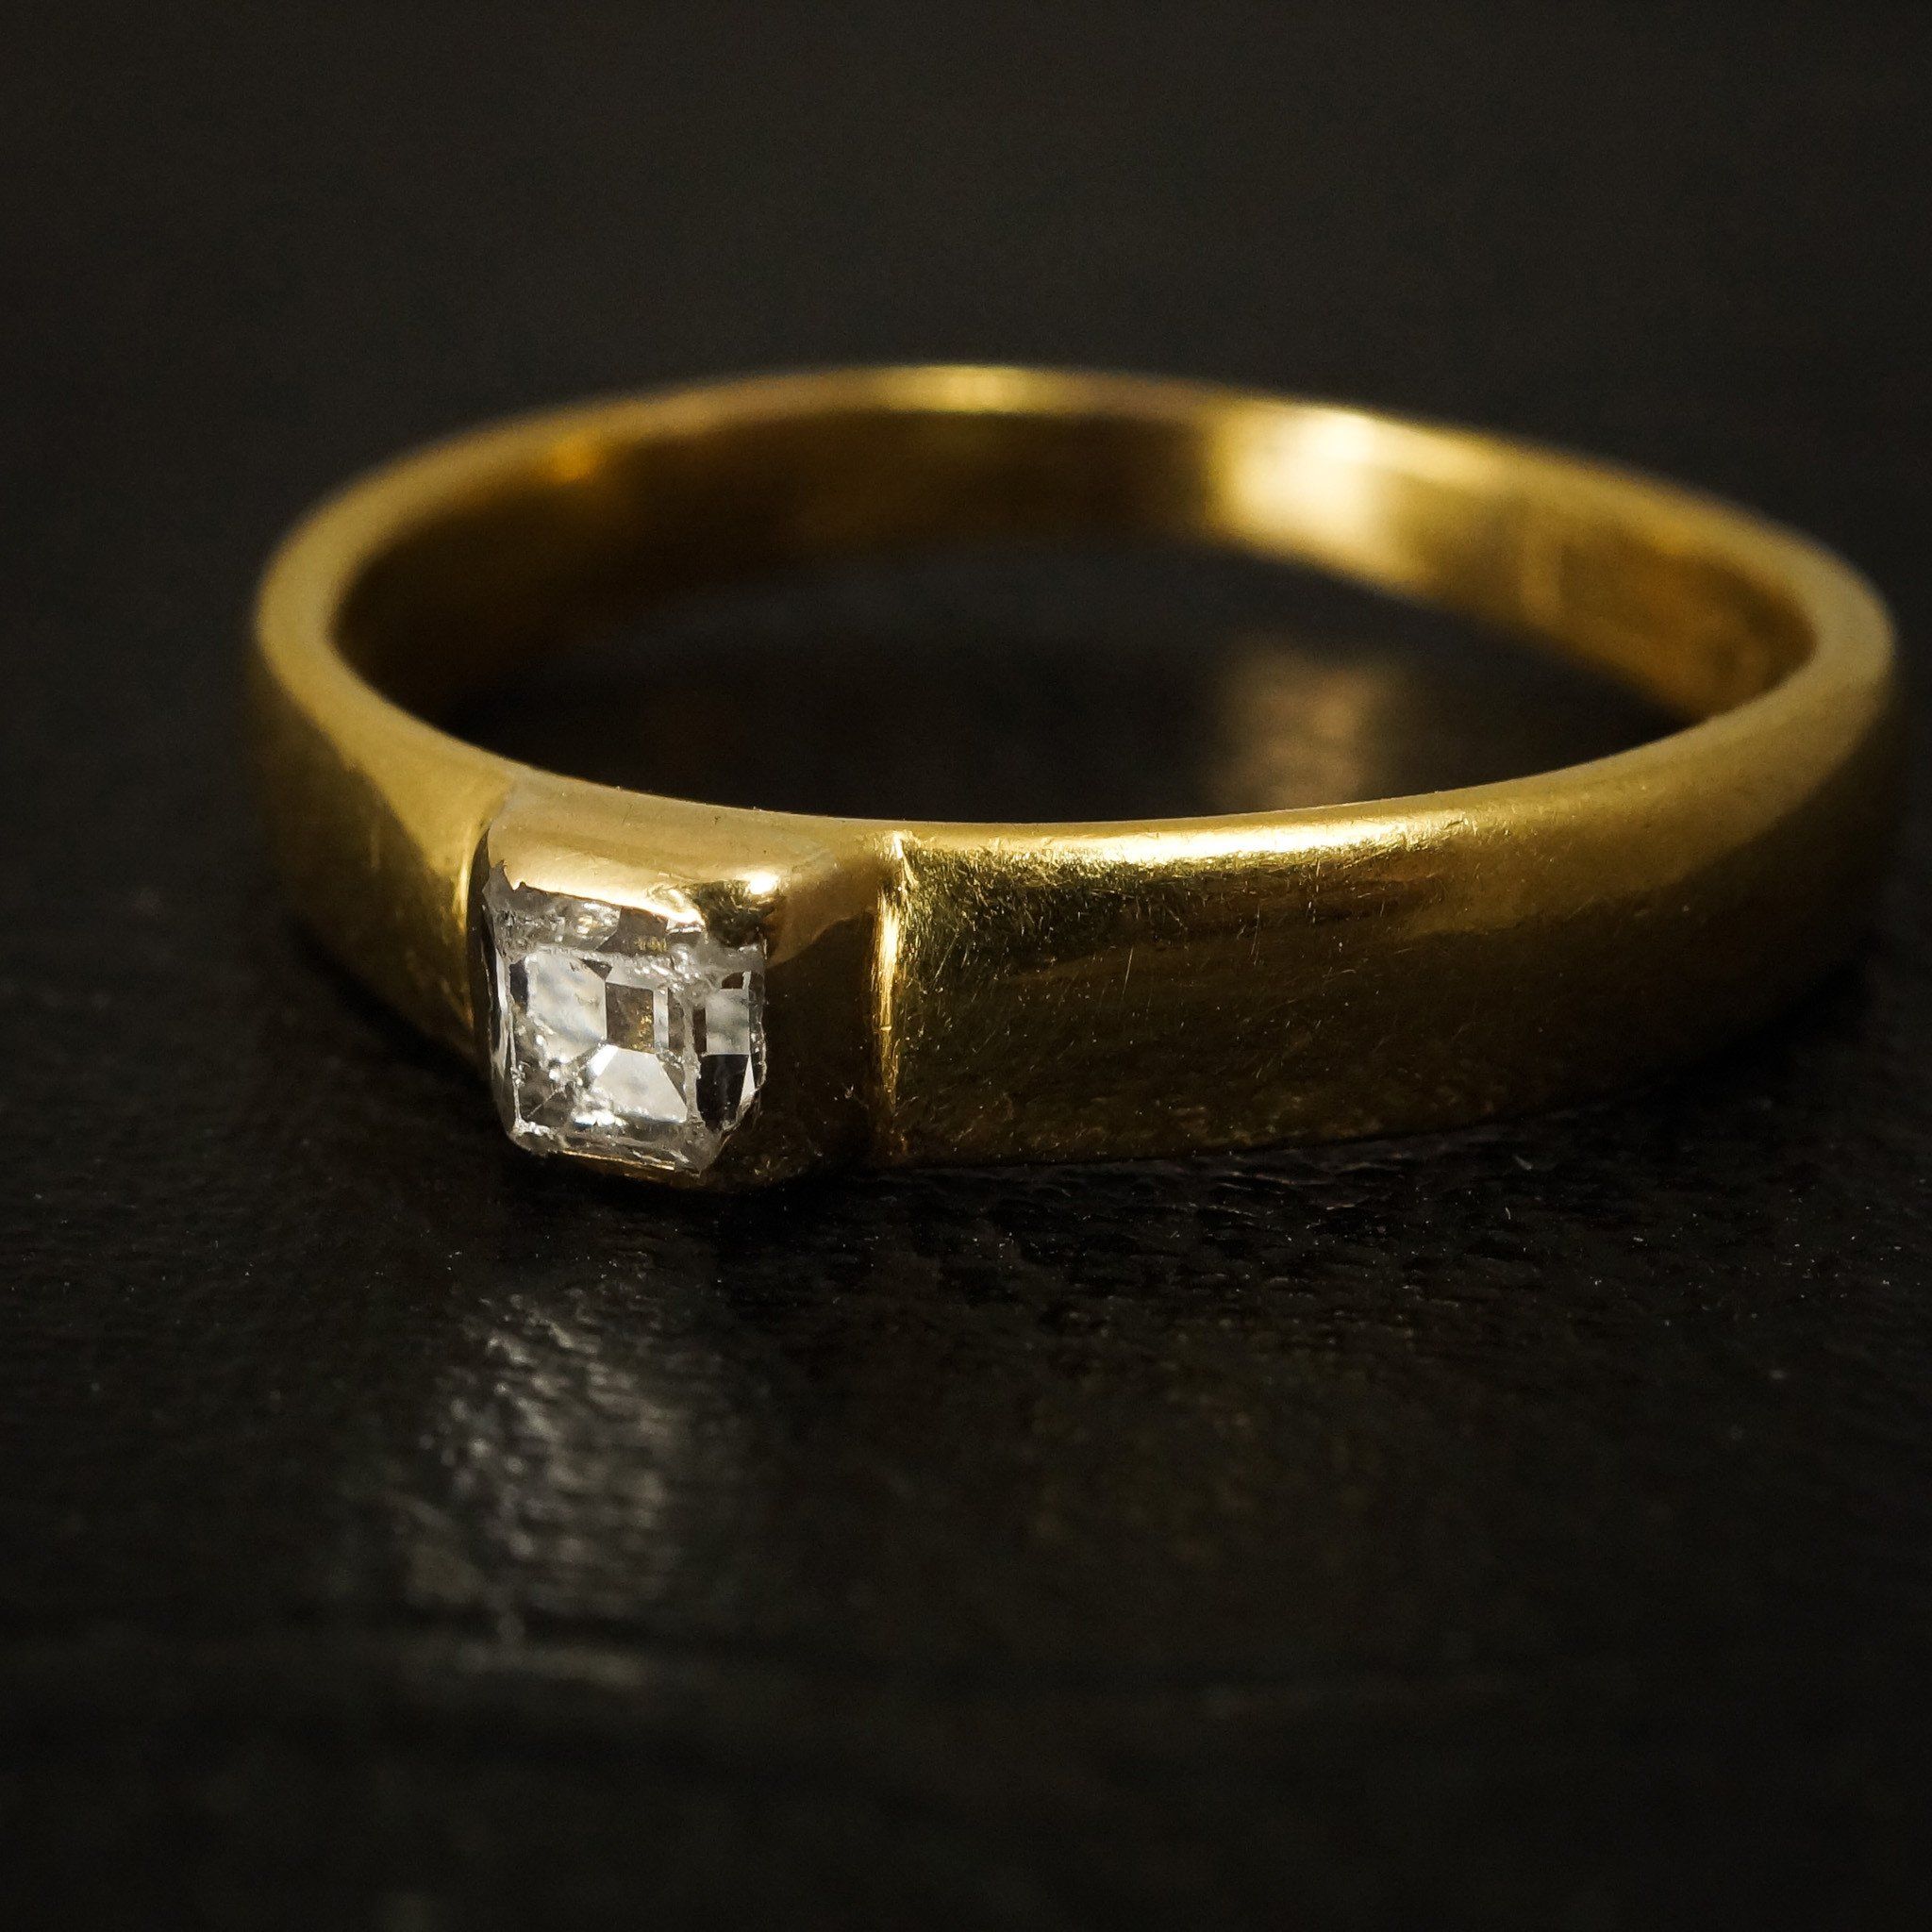 "Erunt Duom Carne Una" Early 17th Century Poesy Ring with Table Cut Diamond